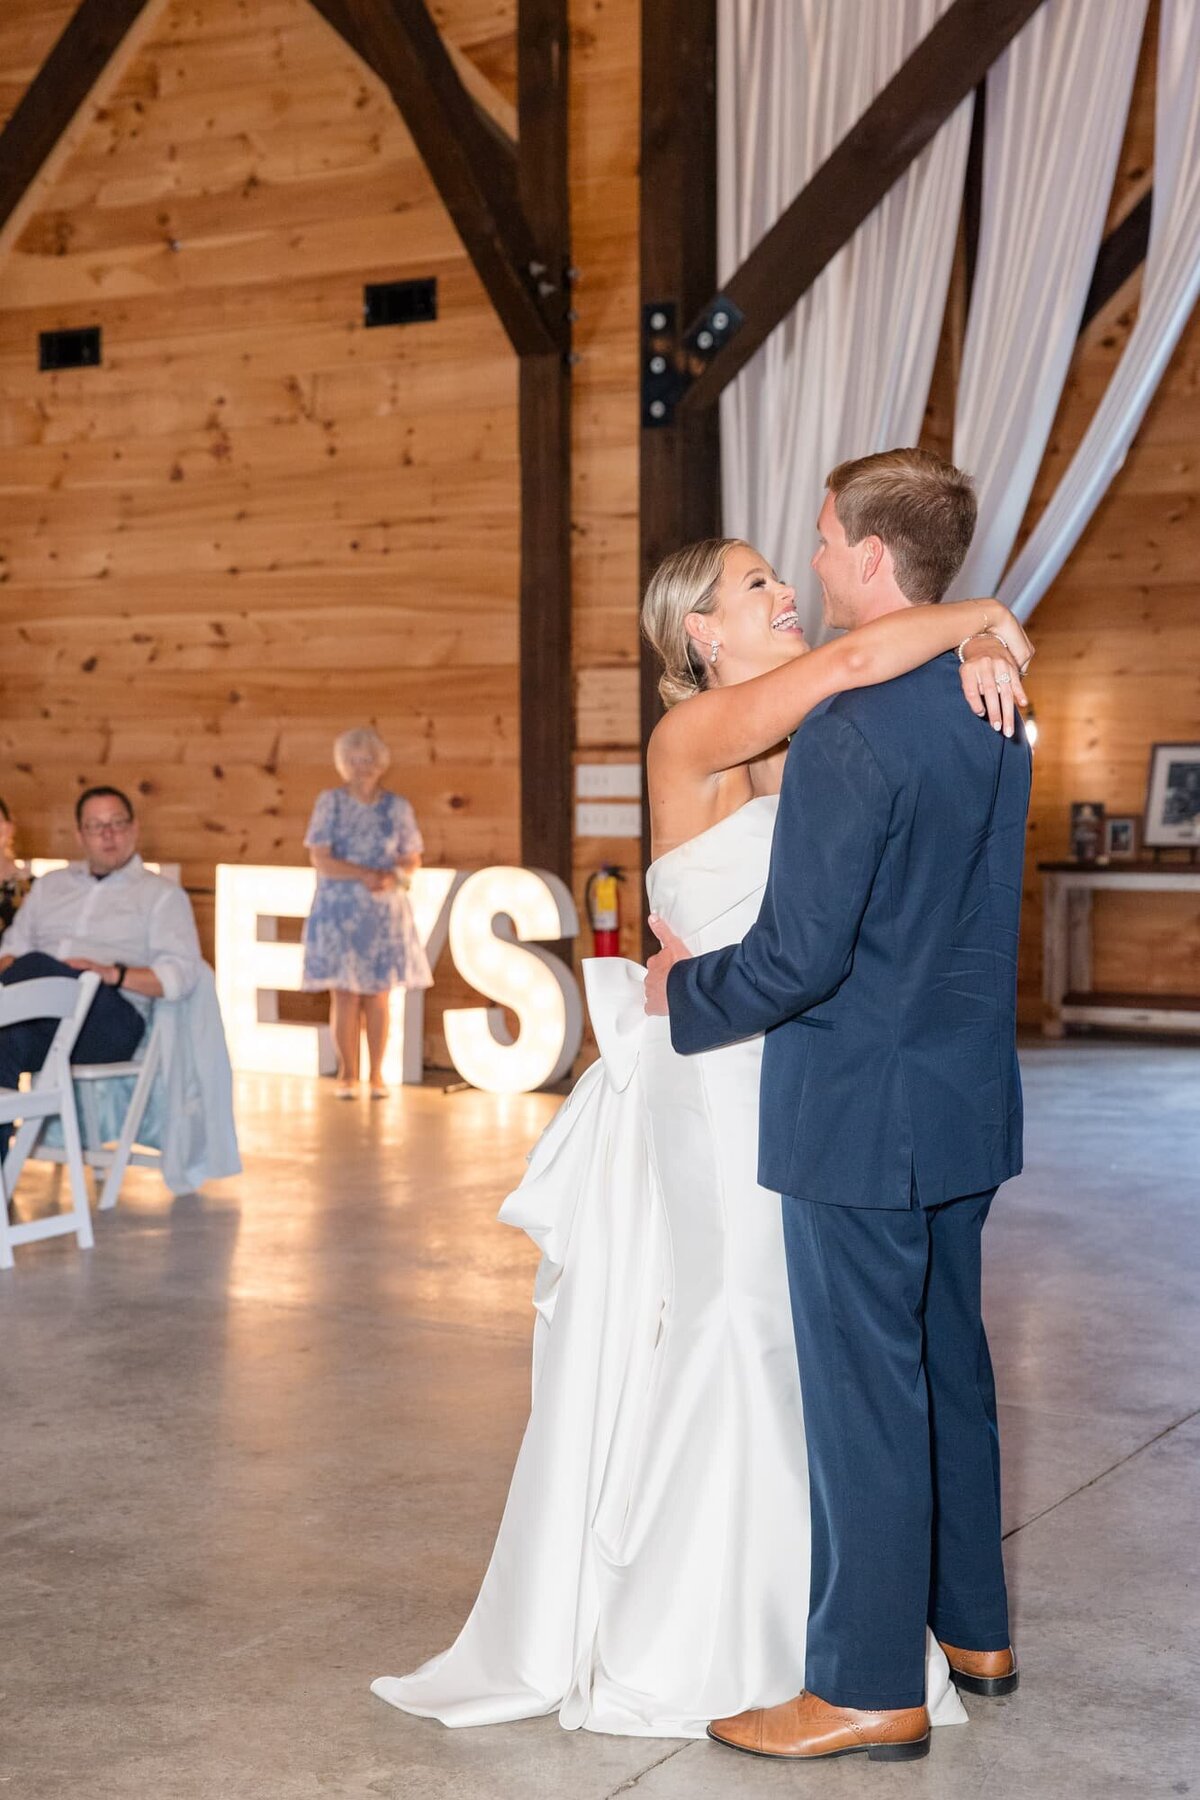 katie_and_alec_wedding_photography_wedding_videography_birmingham_alabama_husband_and_wife_team_photo_video_weddings_engagement_engagements_light_airy_focused_on_marriage_legacy_at_serenity_farms_wedding_117